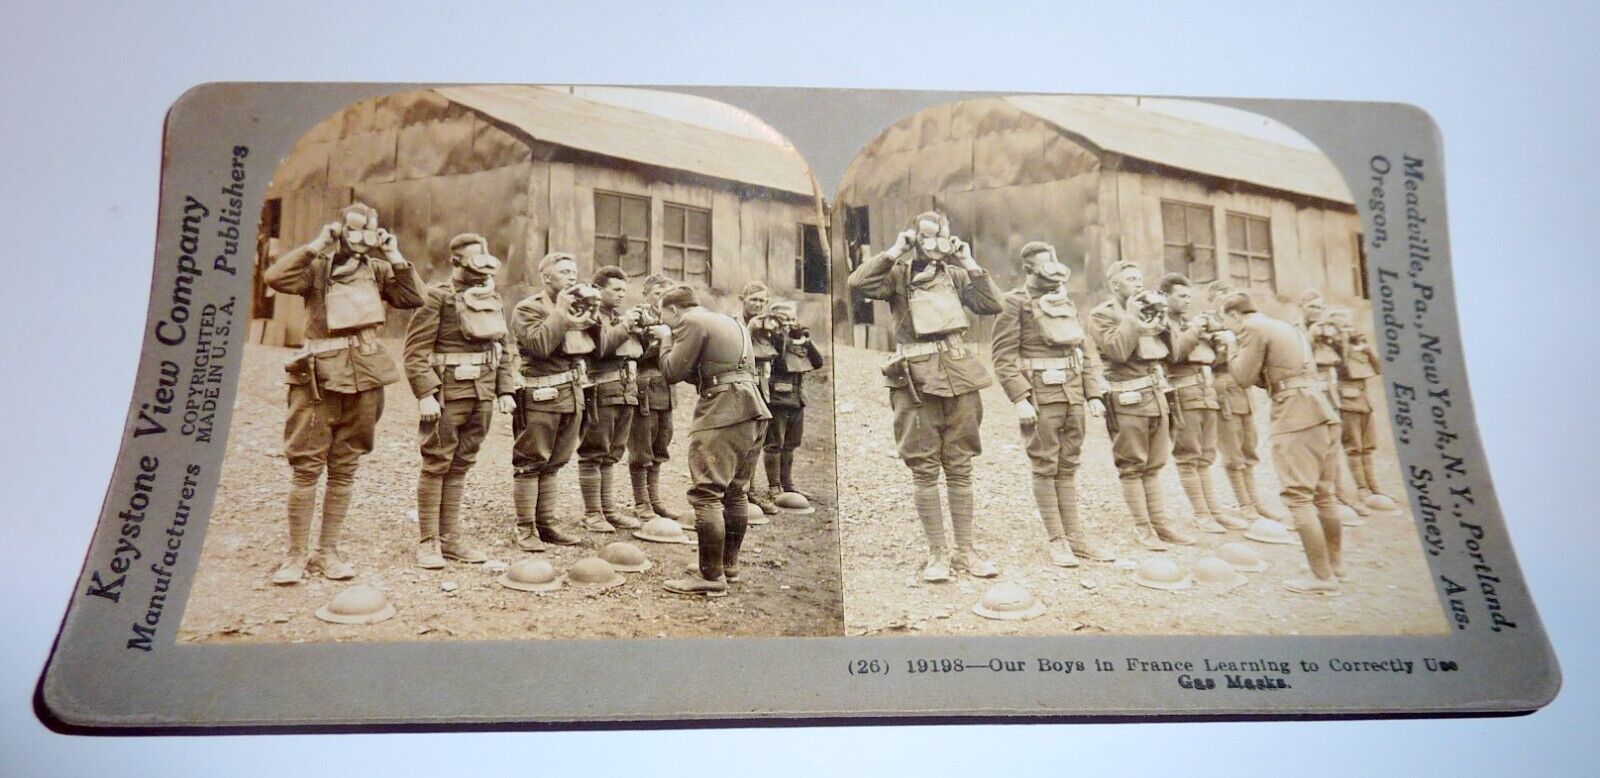 Keystone Stereoscope Stereo View Real Photo Card 19198 Our Boys France Gas Masks